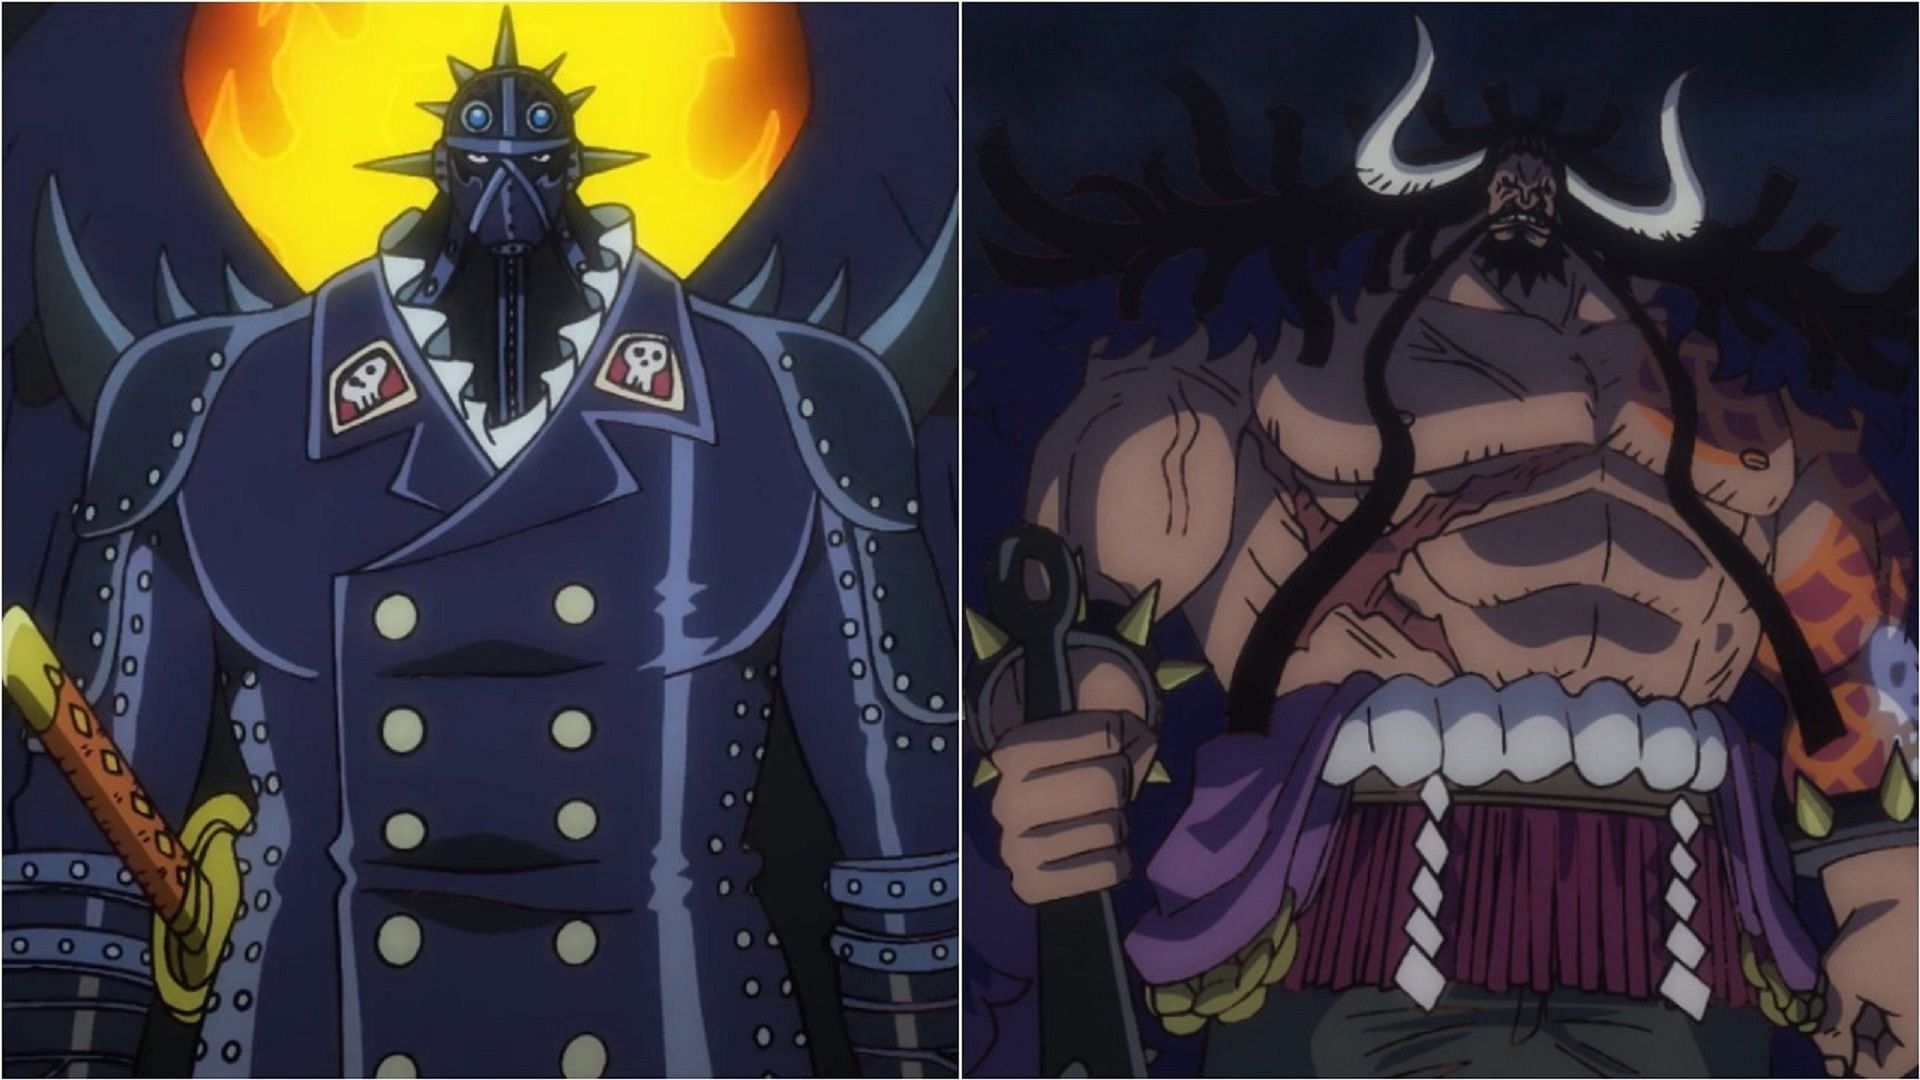 While King impressed Kaido with his strength to the point of being chosen as his right-hand man, Queen is a subordinate of a lower level (Image via Toei Animation, One Piece)